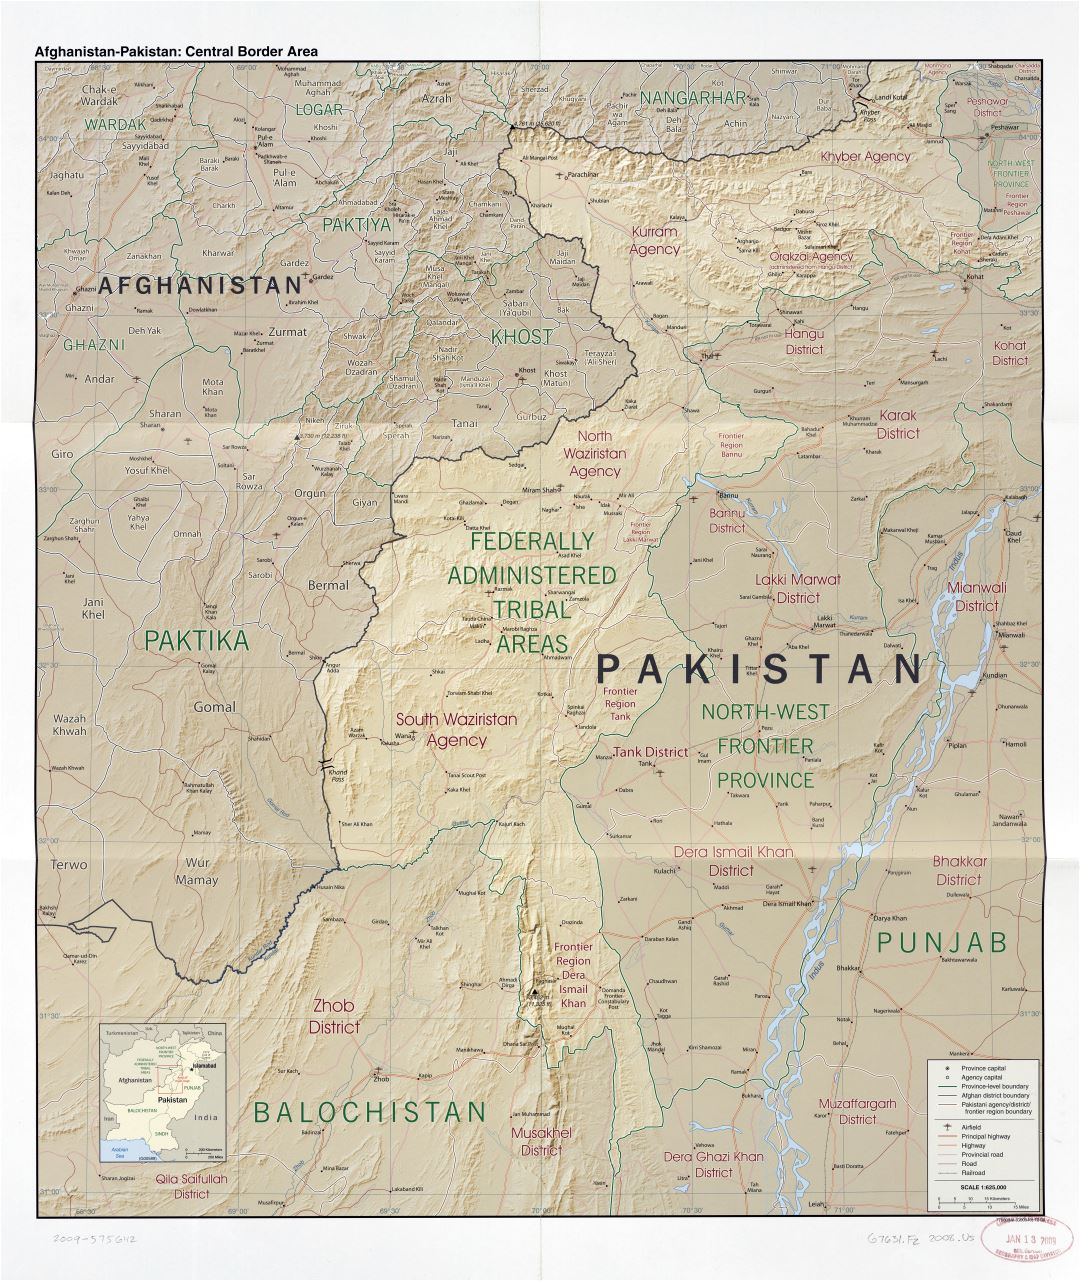 Large scale detailed Afghanistan - Pakistan central border area map with relief, administrative divisions, roads, railroads, airfields and cities - 2008